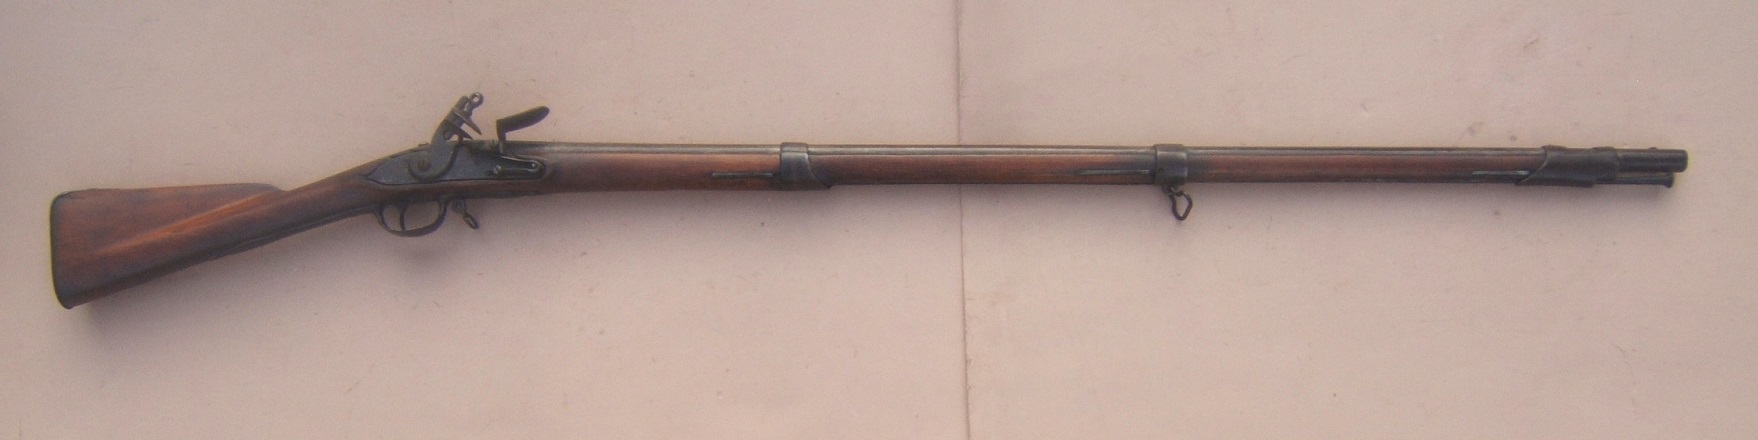 A VERY GOOD WAR of 1812 PERIOD US MODEL 1795/8 CONTRACT MUSKET, ca. 1798 view 1